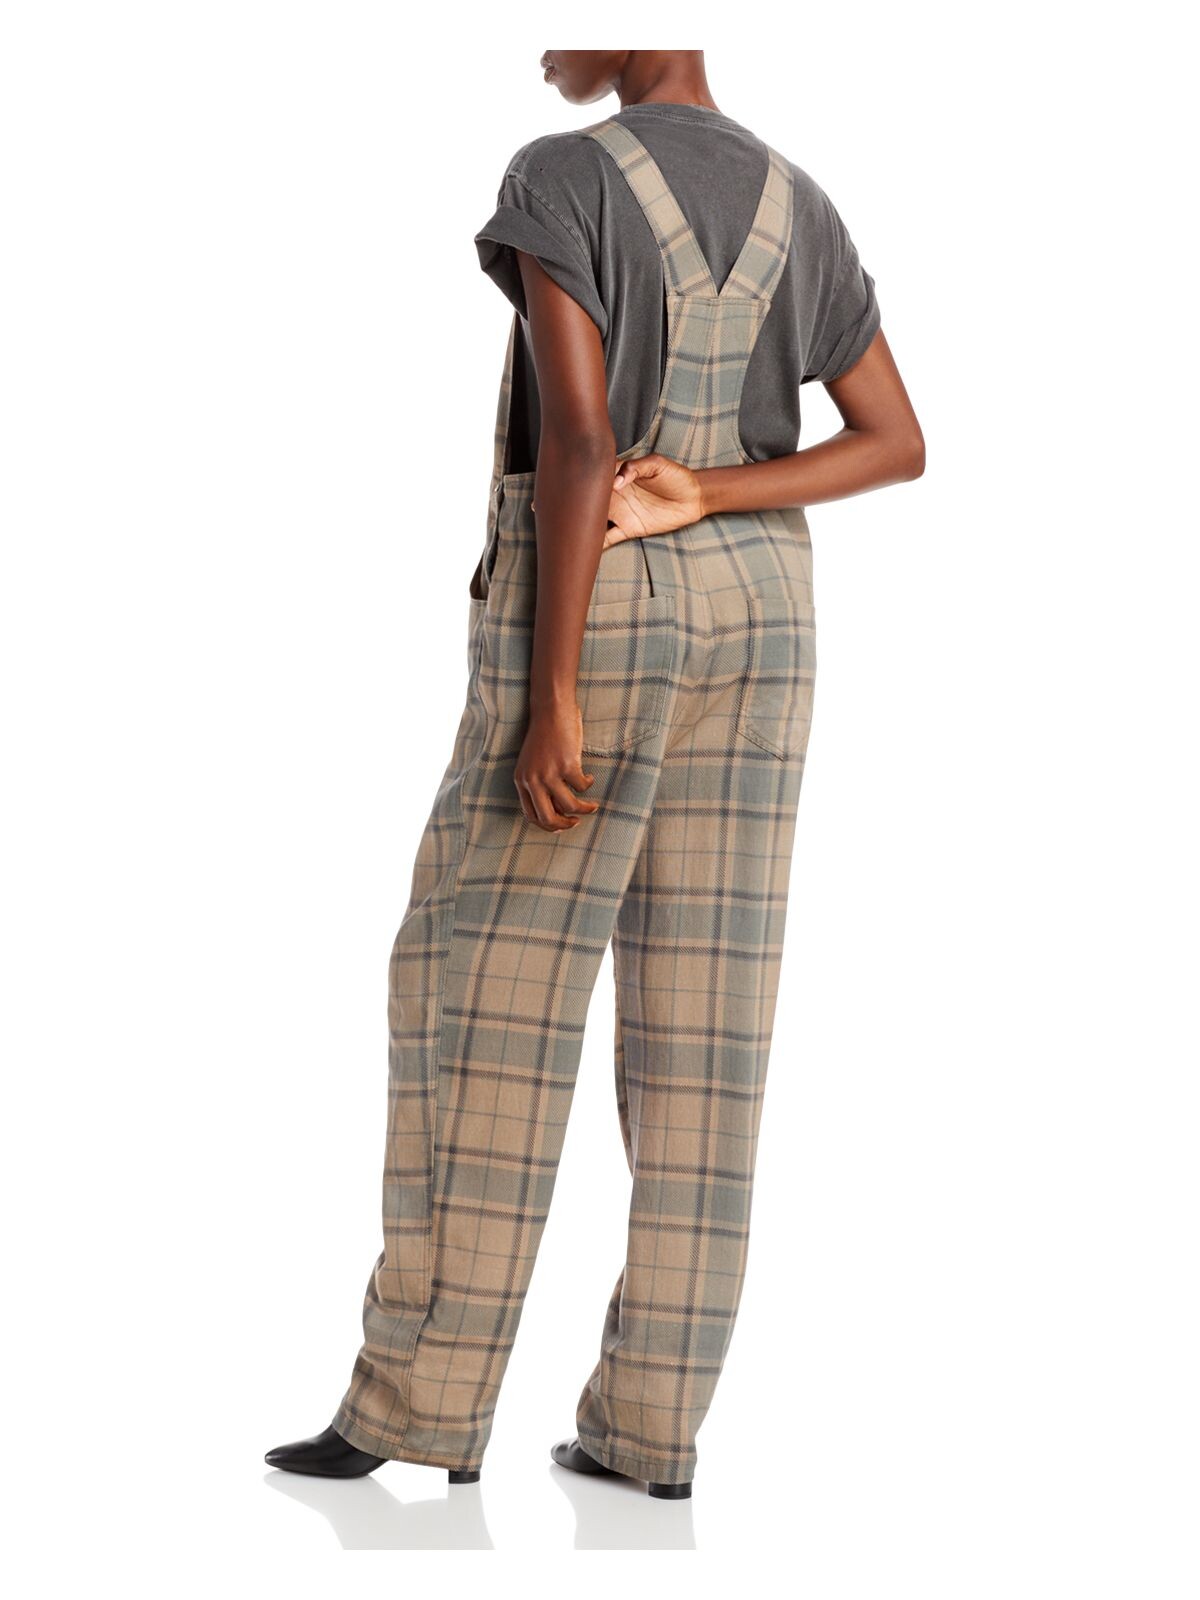 WEWOREWHAT Womens Brown Pocketed Bib Overall Side Button Closures Plaid Sleeveless Square Neck Straight leg Jumpsuit XS